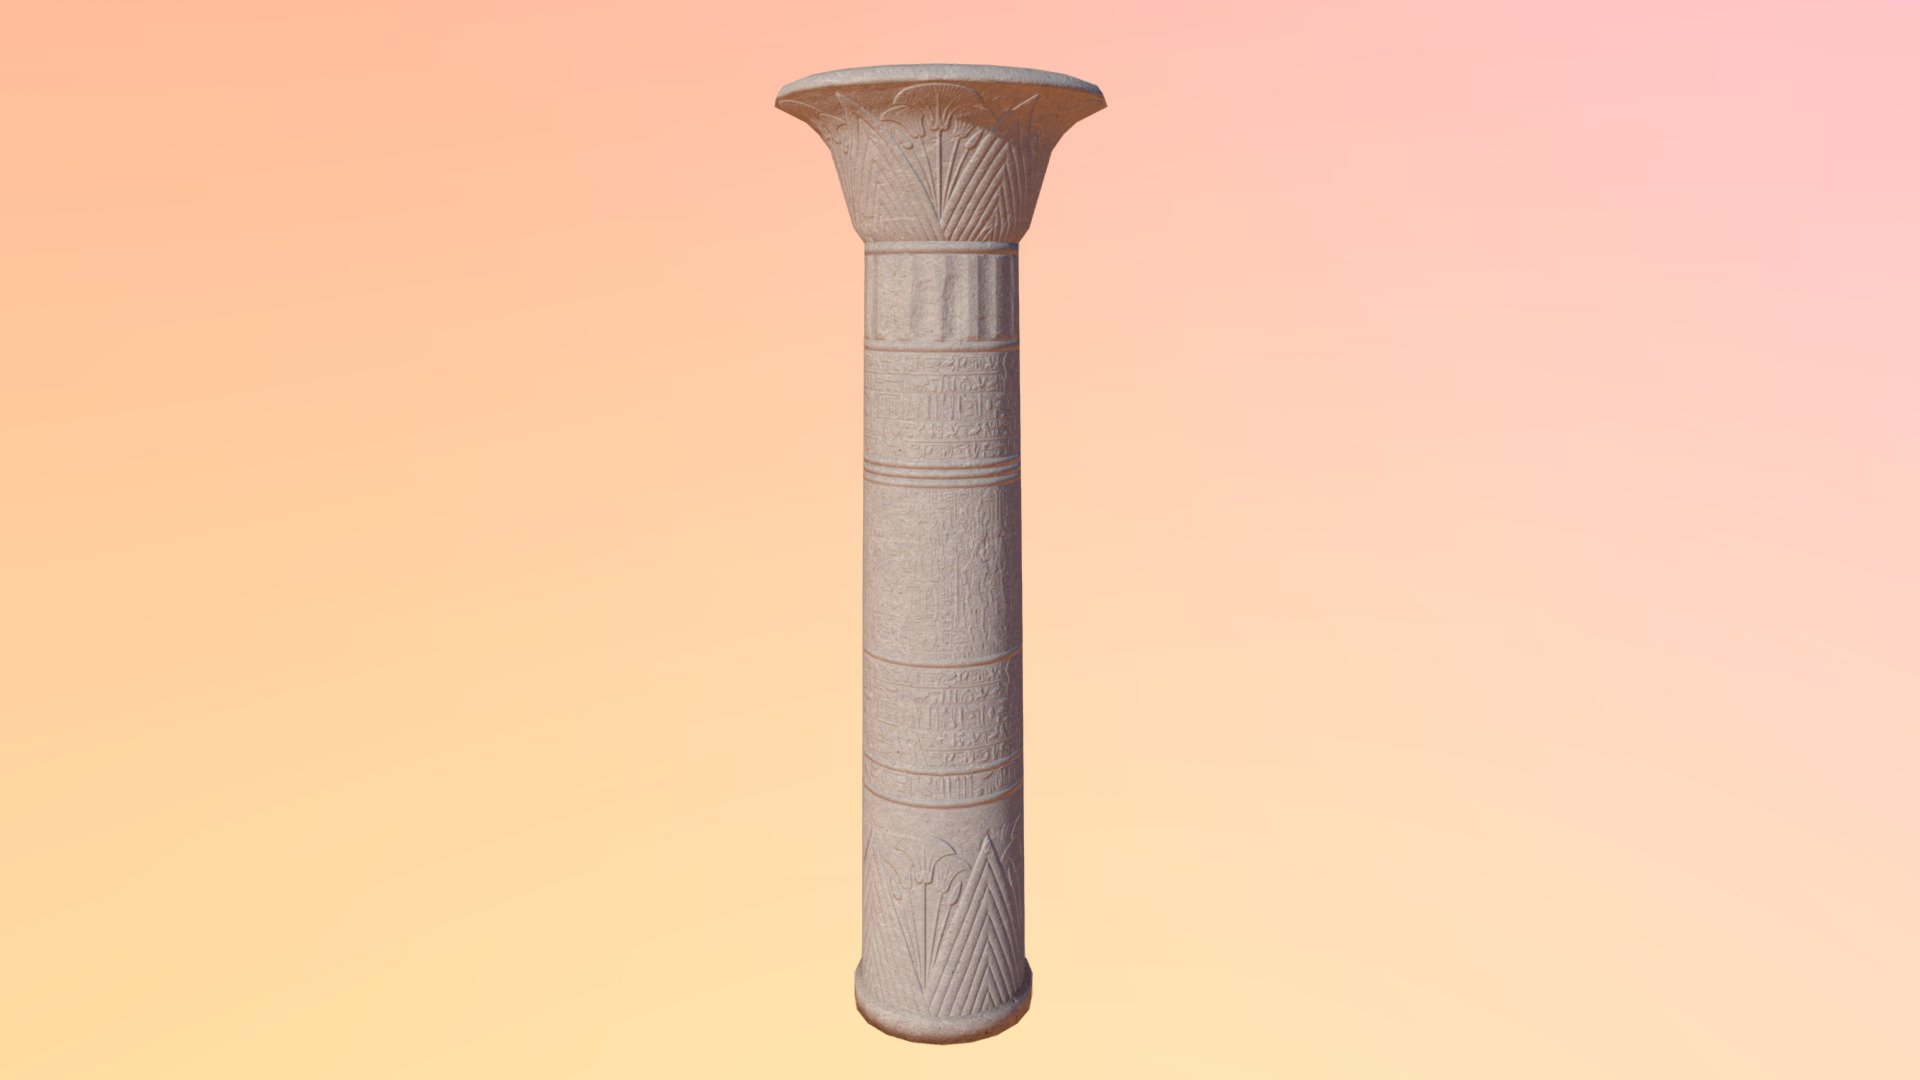 An Egyptian column created for my Desert Ruin environment on my ArtStation page 3d model